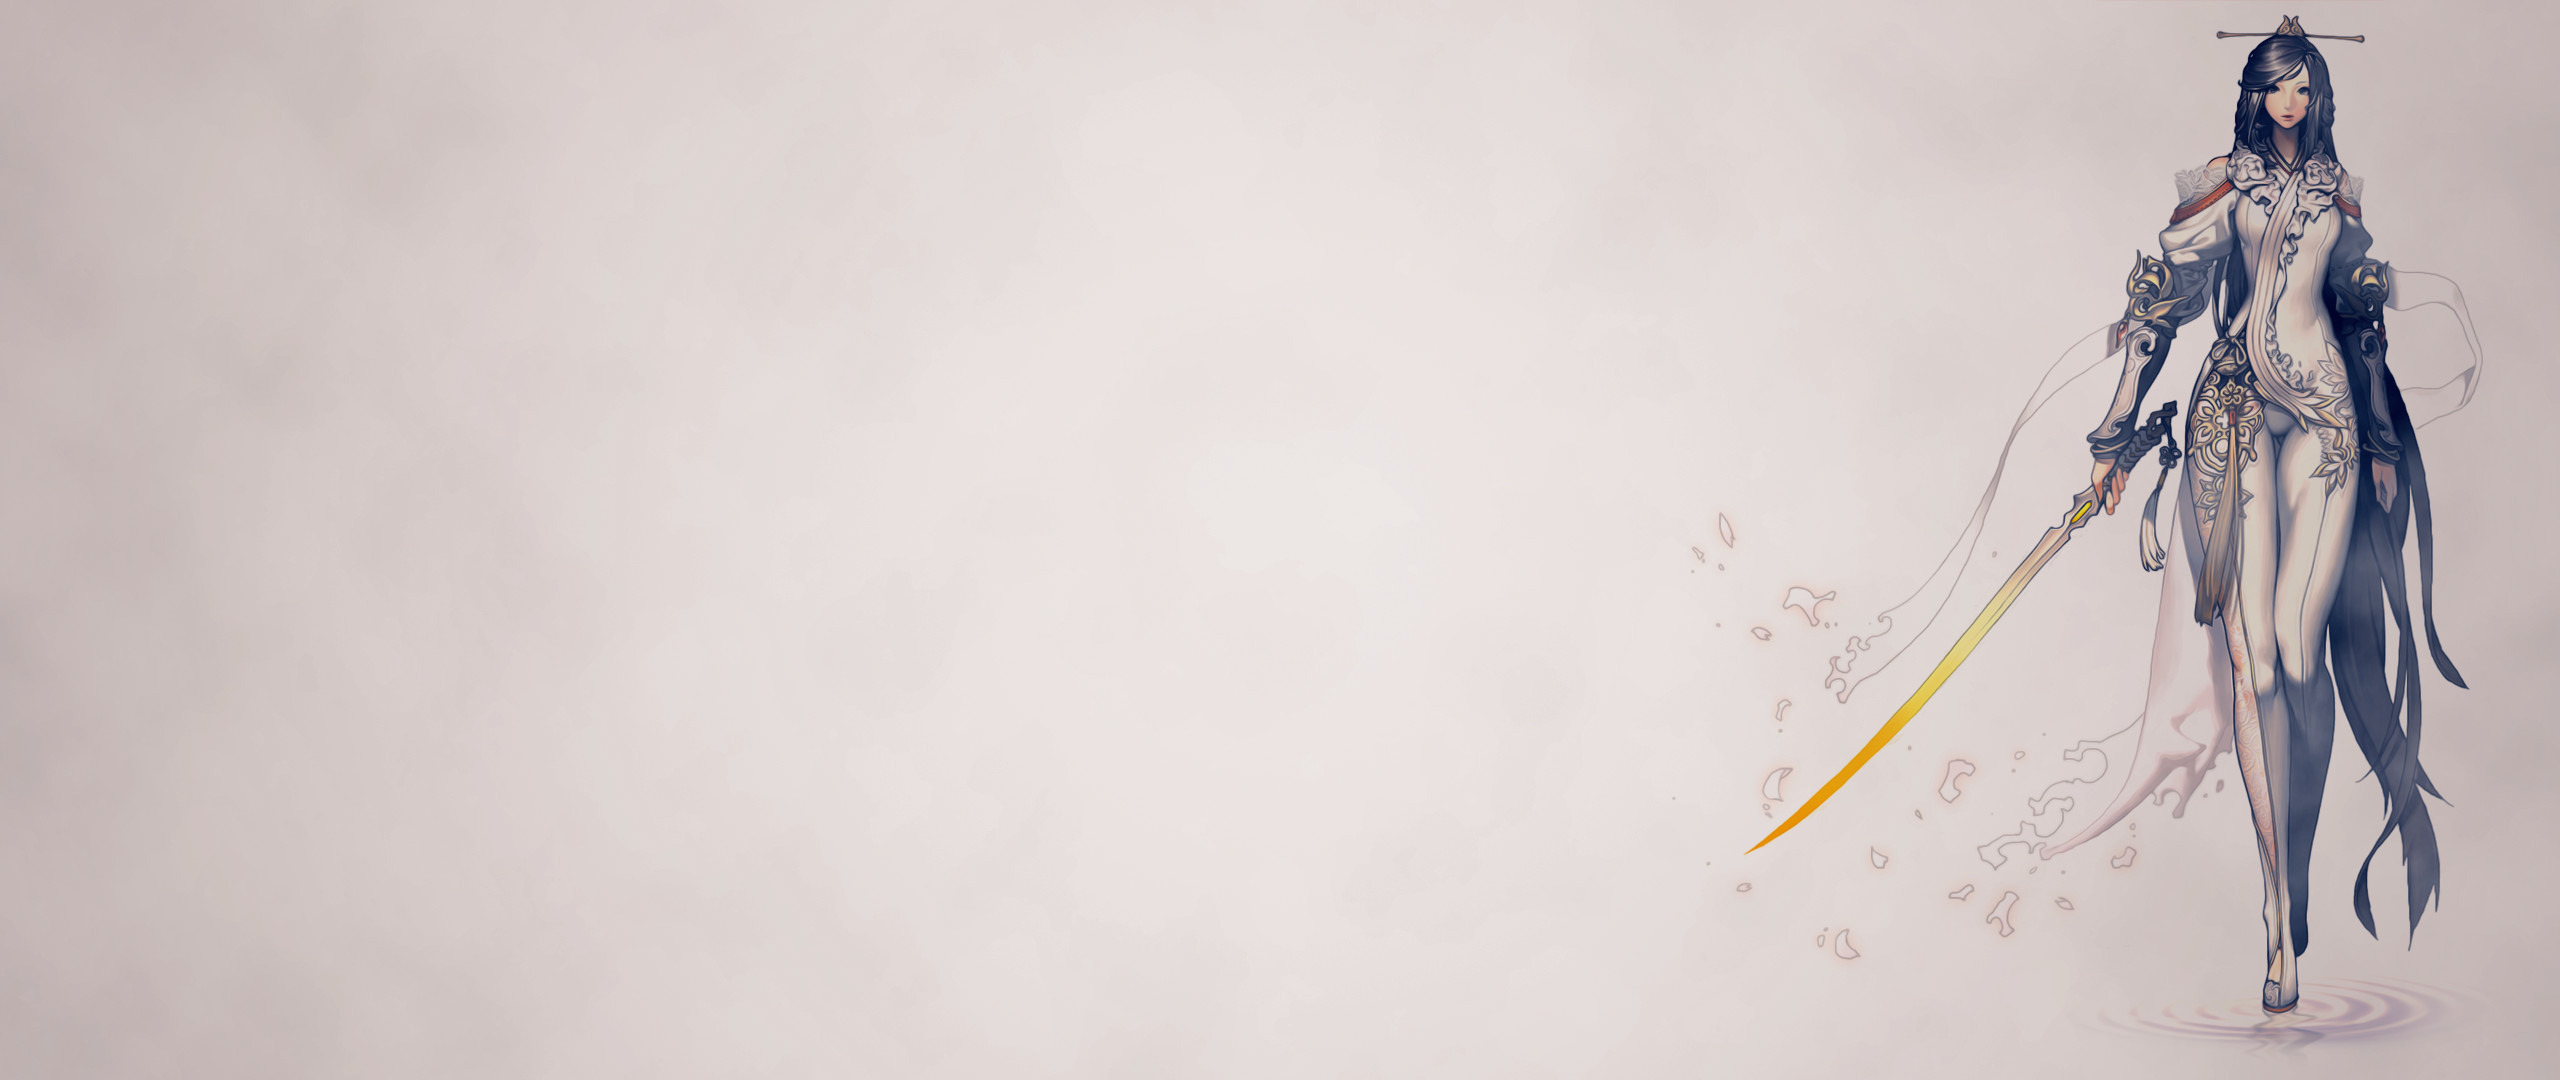 2560x1080 ... Blade and Soul Jiwan Wallpaper [] by evilhamsterzzz